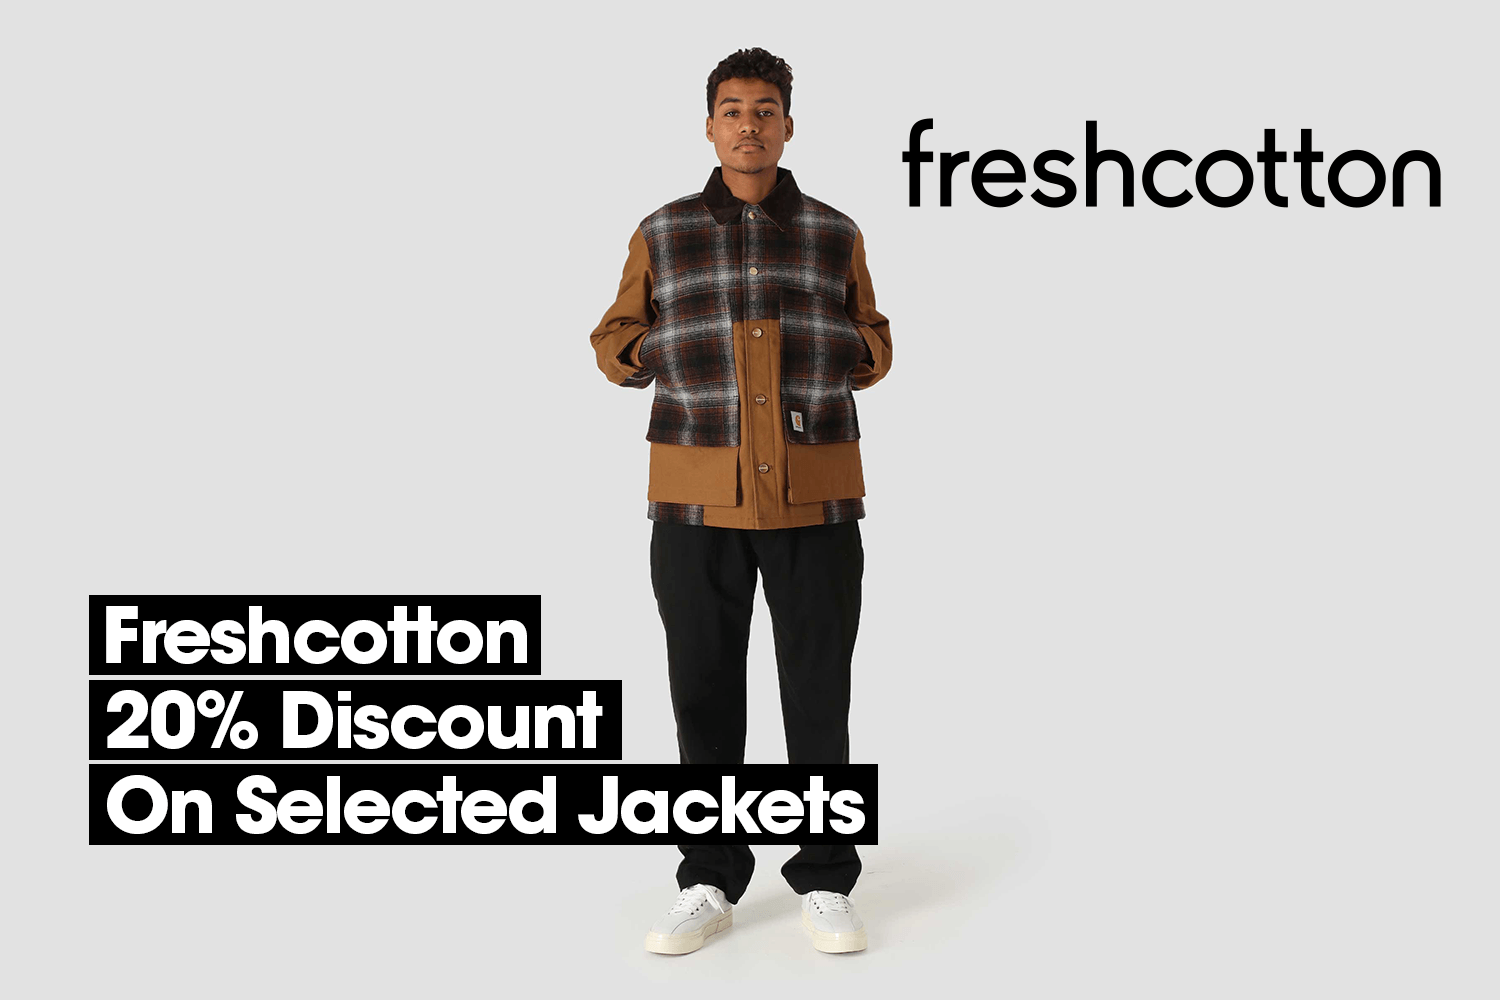 Freshcotton has 20% discount on selected jackets